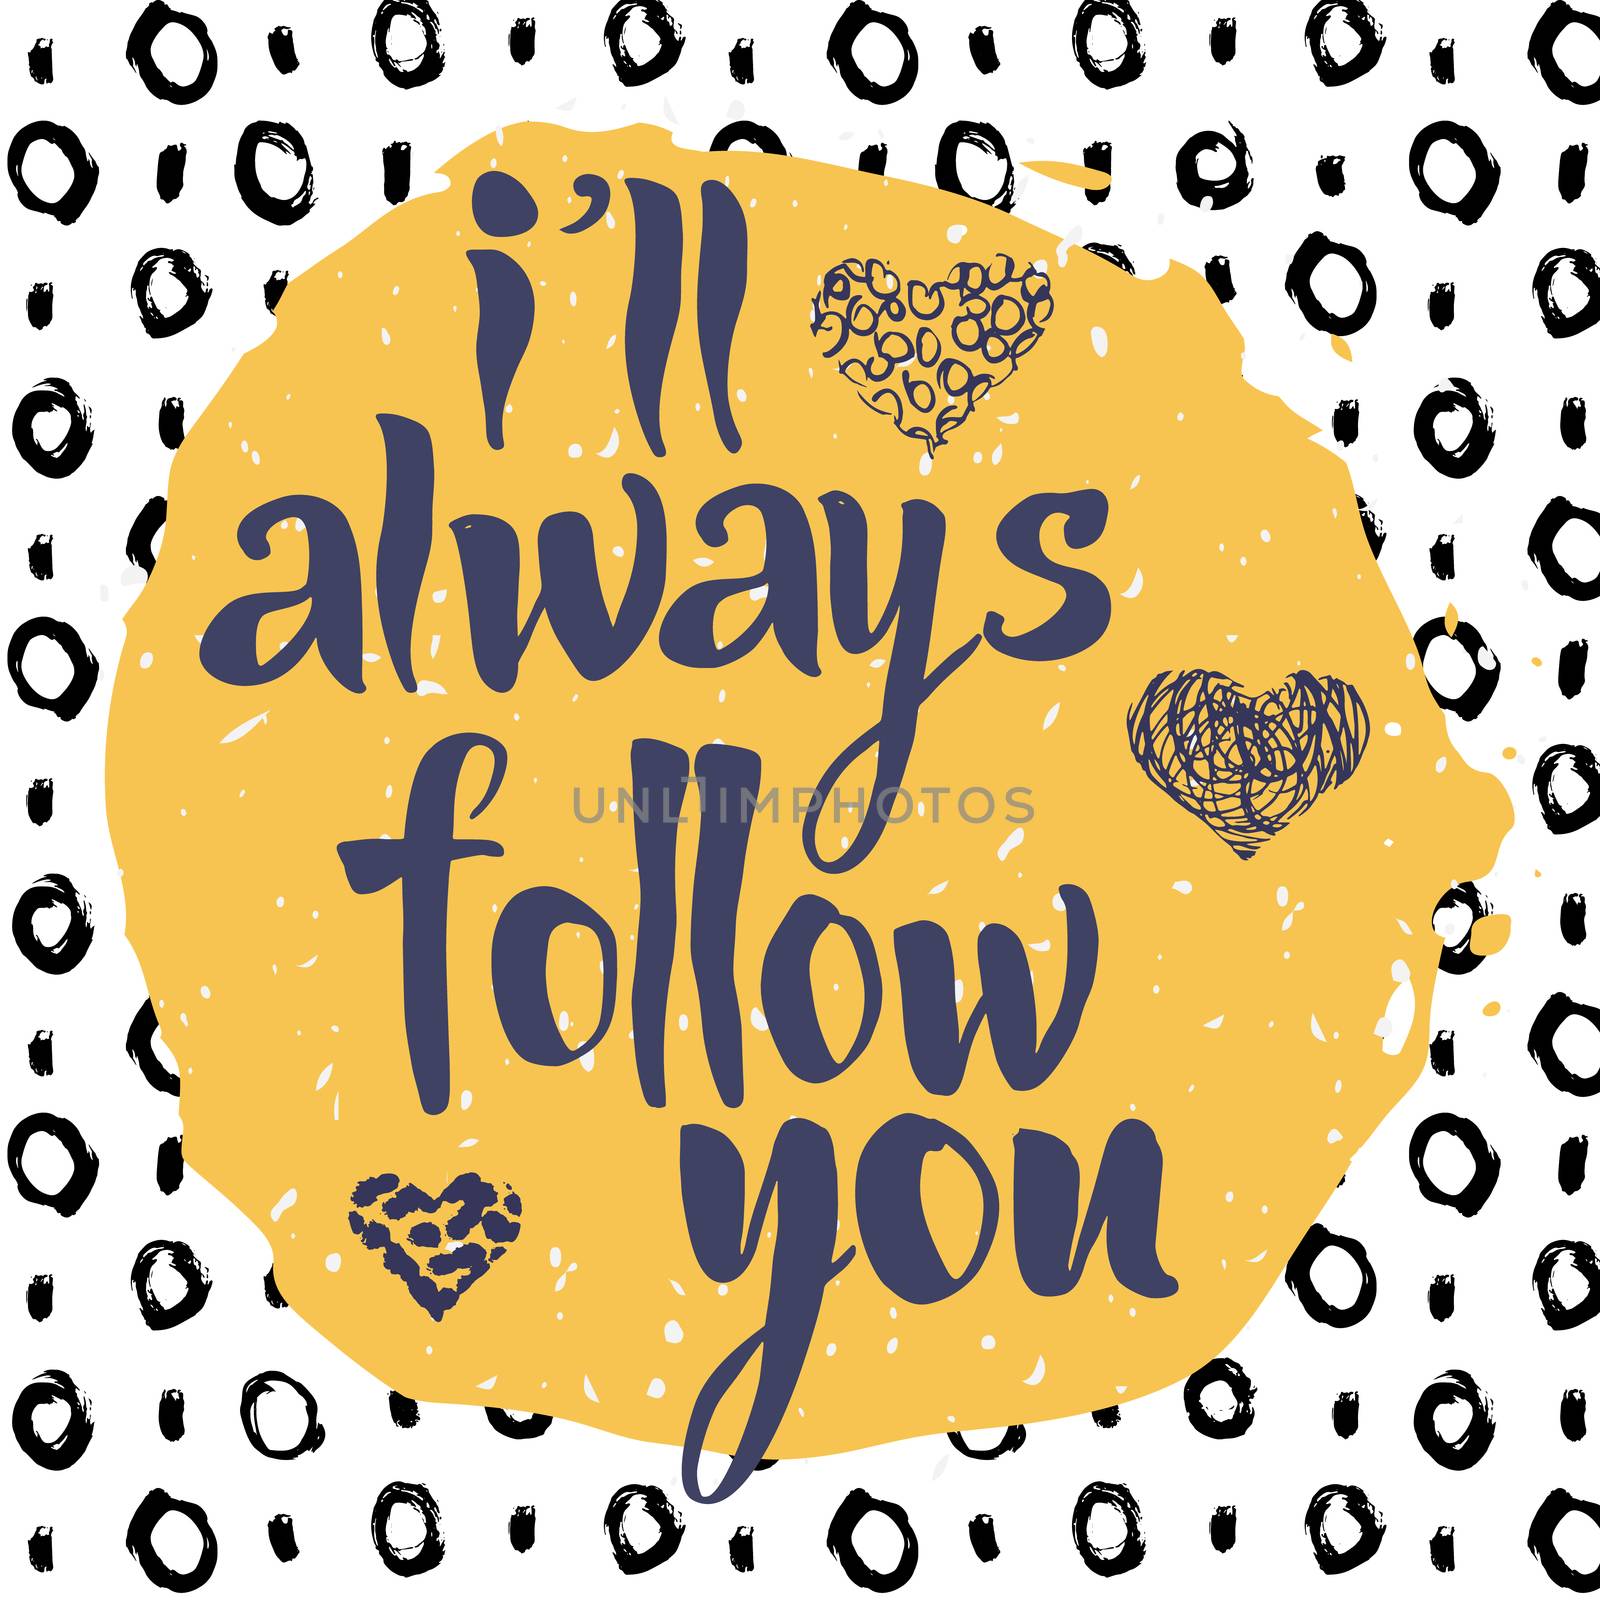 Ill always follow you, hand drawn romantic inspiration quote.